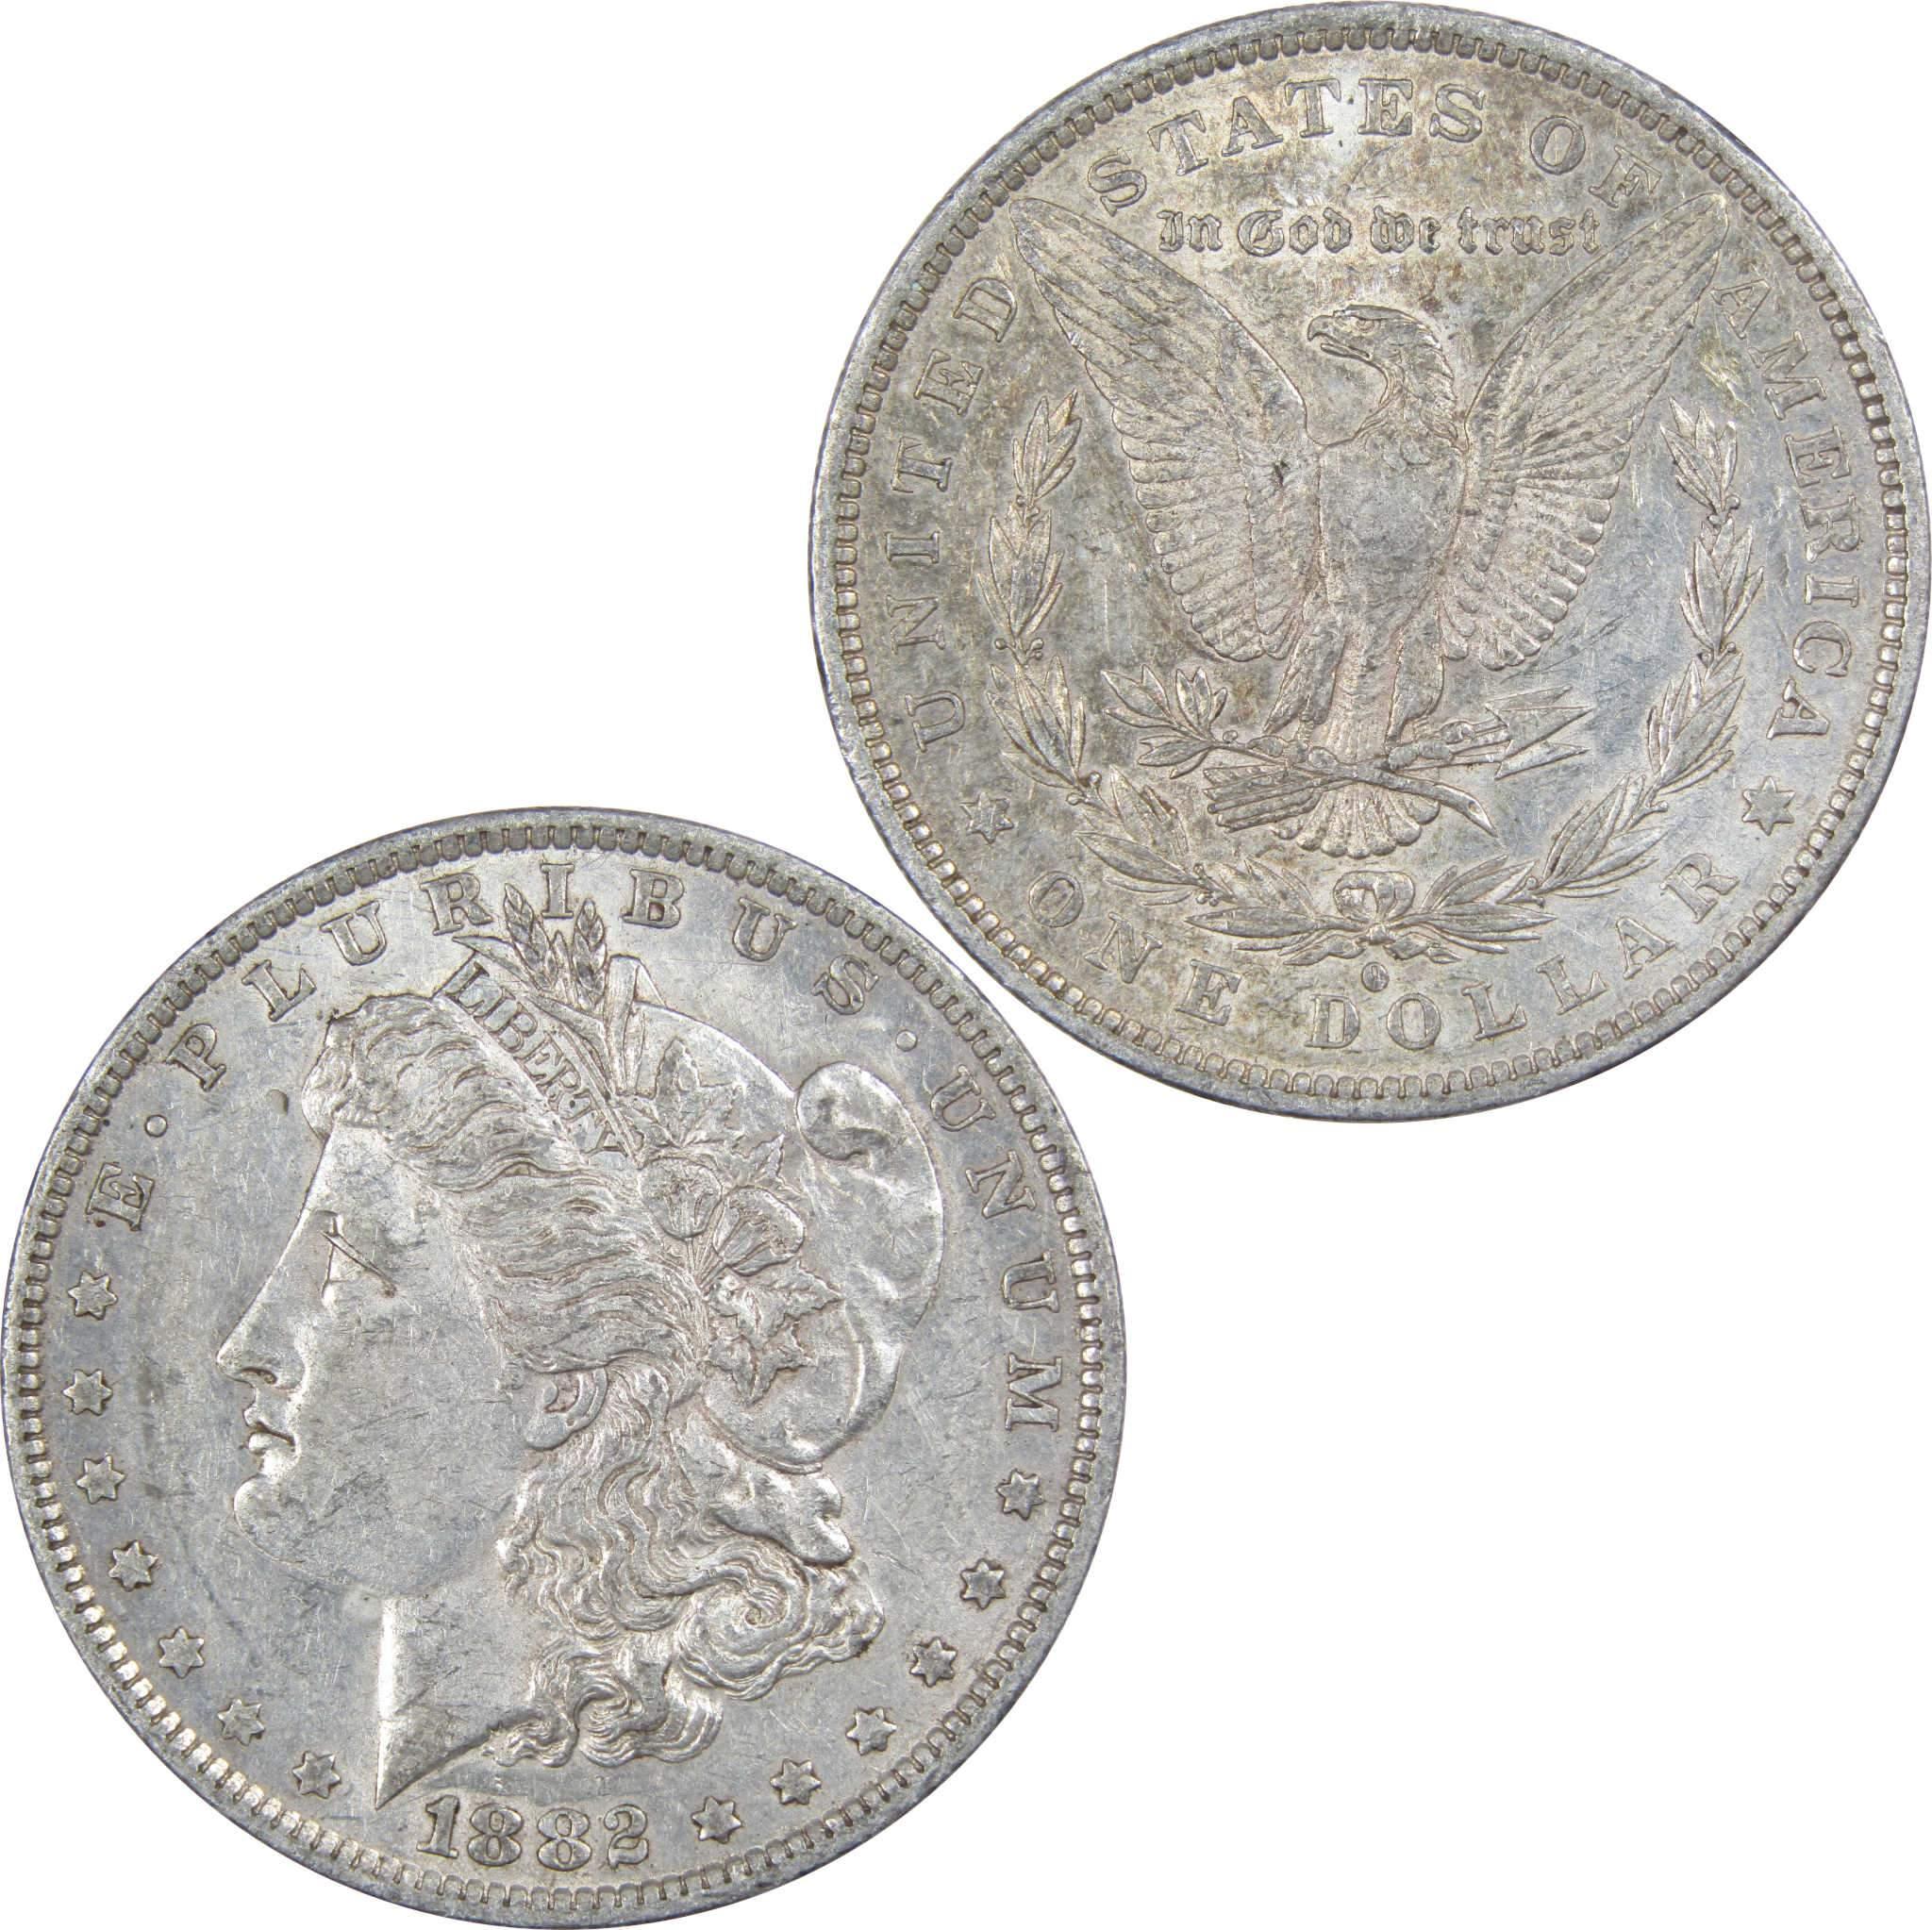 1882 O/S Morgan Dollar XF EF Extremely Fine 90% Silver SKU:IPC5330 - Morgan coin - Morgan silver dollar - Morgan silver dollar for sale - Profile Coins &amp; Collectibles